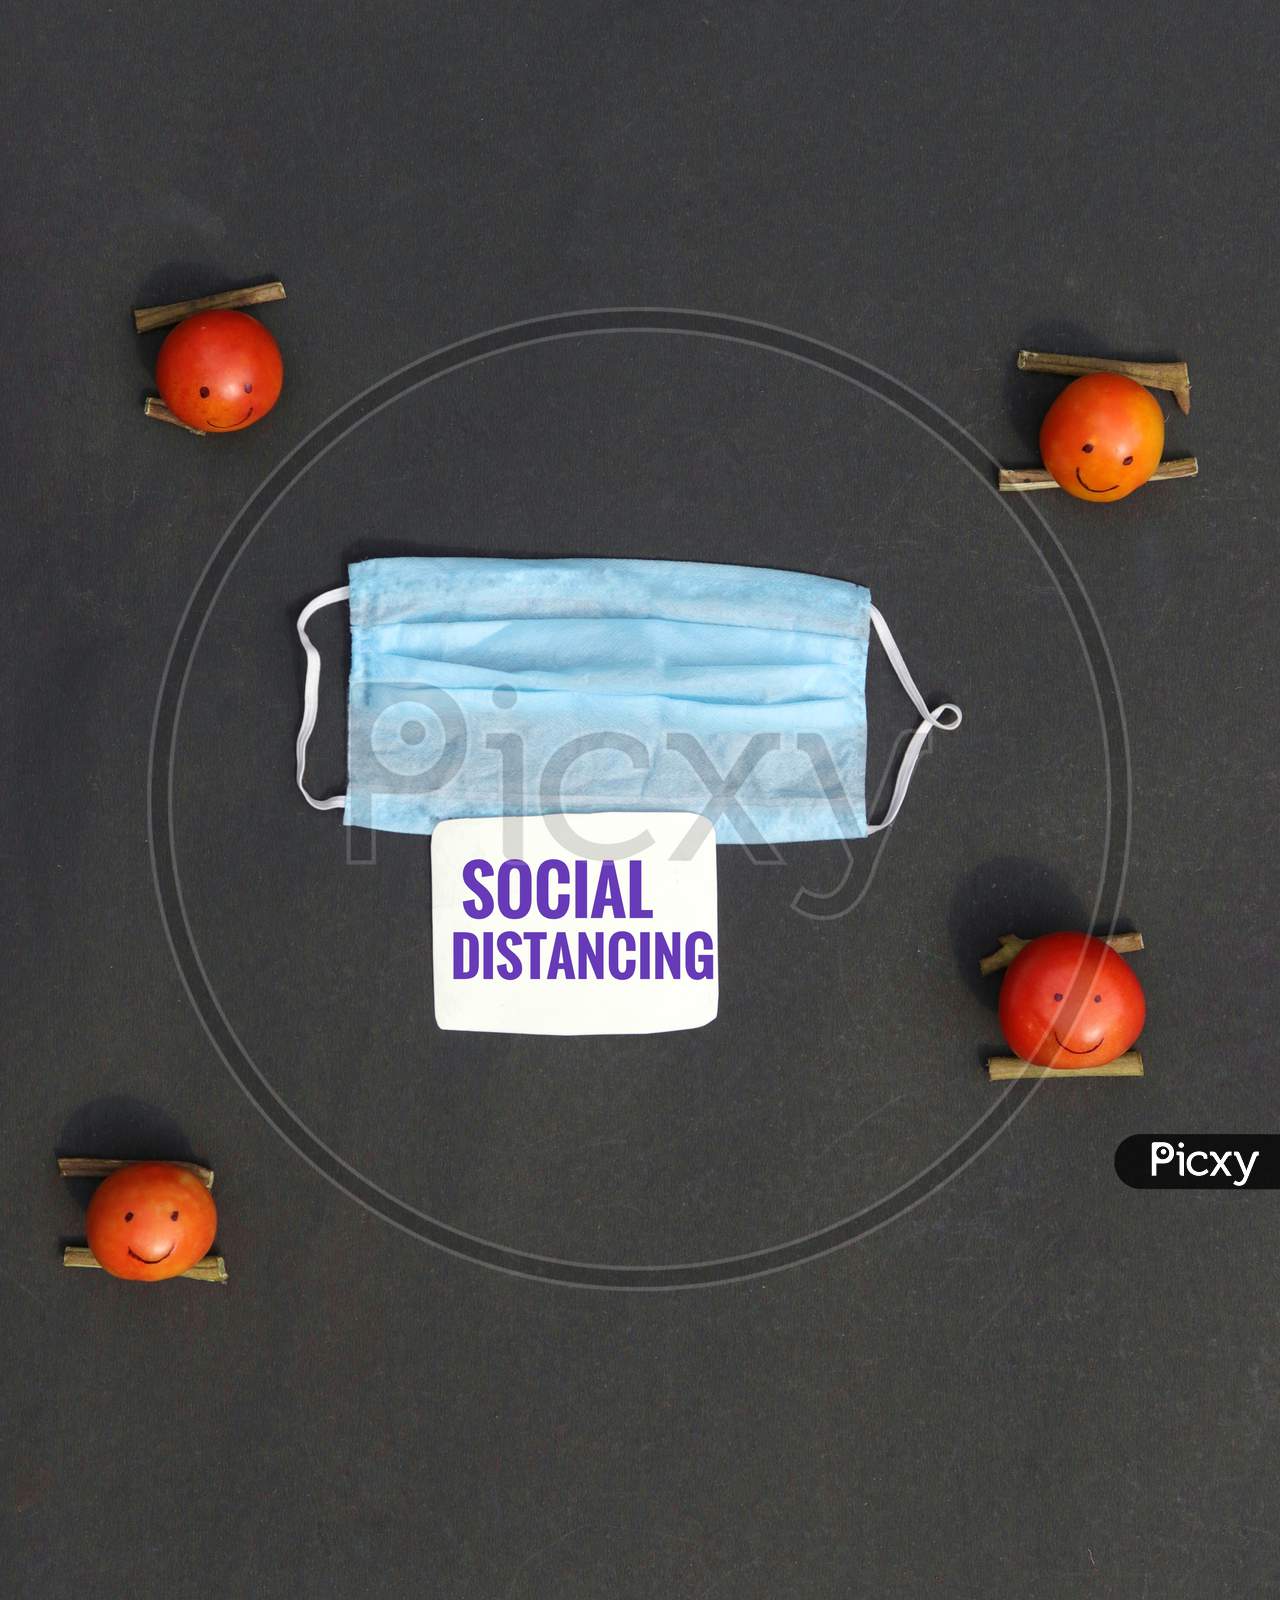 Social Distancing or Safe Distance Due to Coronavirus Conceptual Photo with Medical Face Mask and Tomato Made CharactersSocial Distancing or Safe Distance Due to Coronavirus Conceptual Photo with Medical Face Mask and Tomato Made Characters